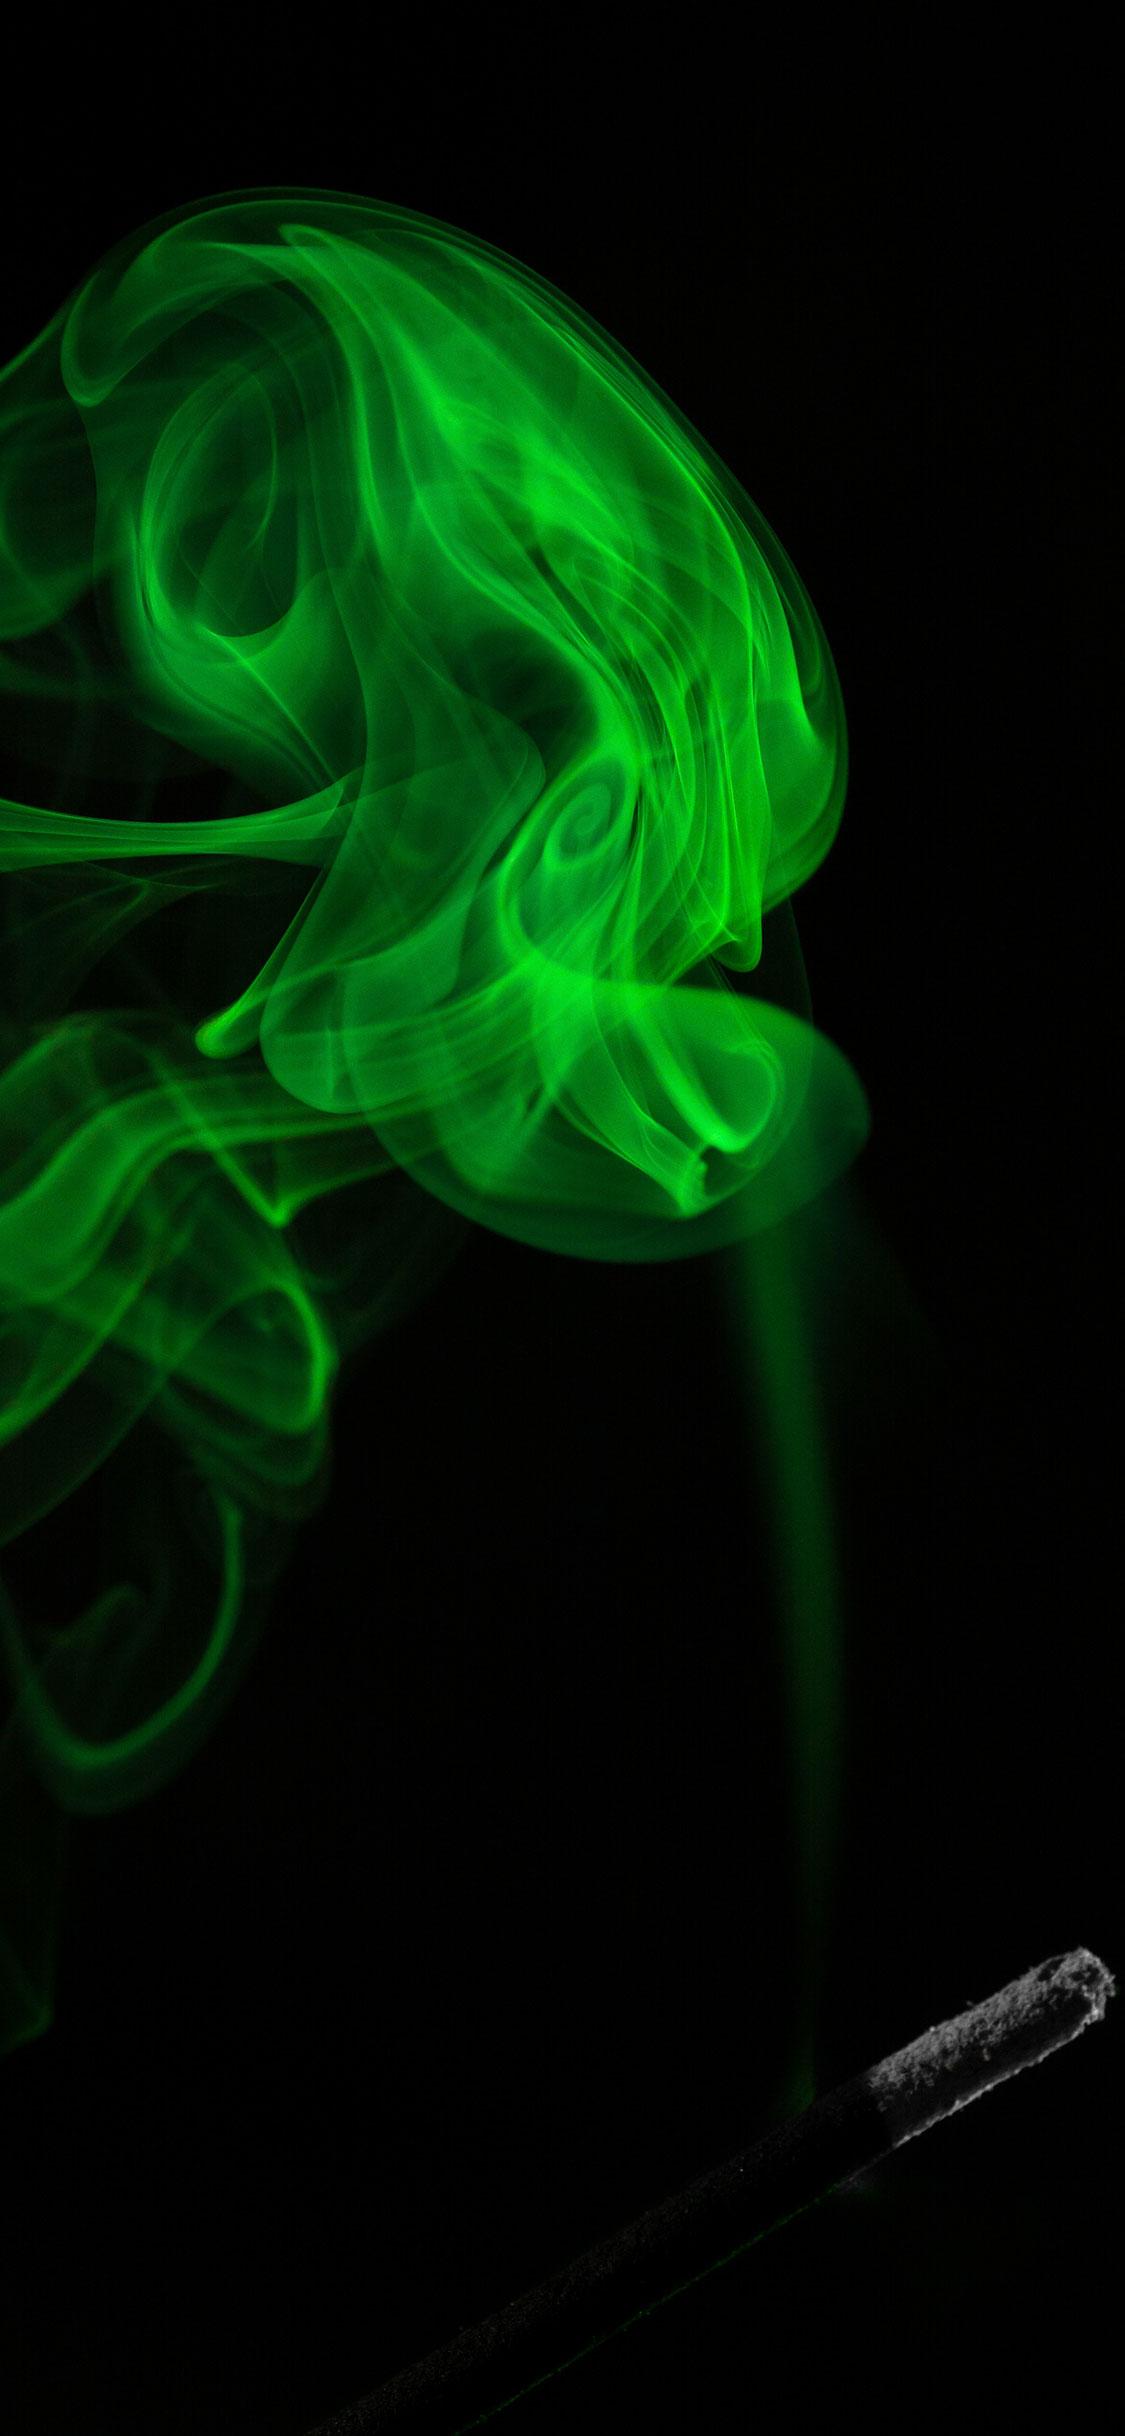 1125 x 2436 · jpeg - Smoke Wallpaper for iPhone 11, Pro Max, X, 8, 7, 6 - Free Download on ...